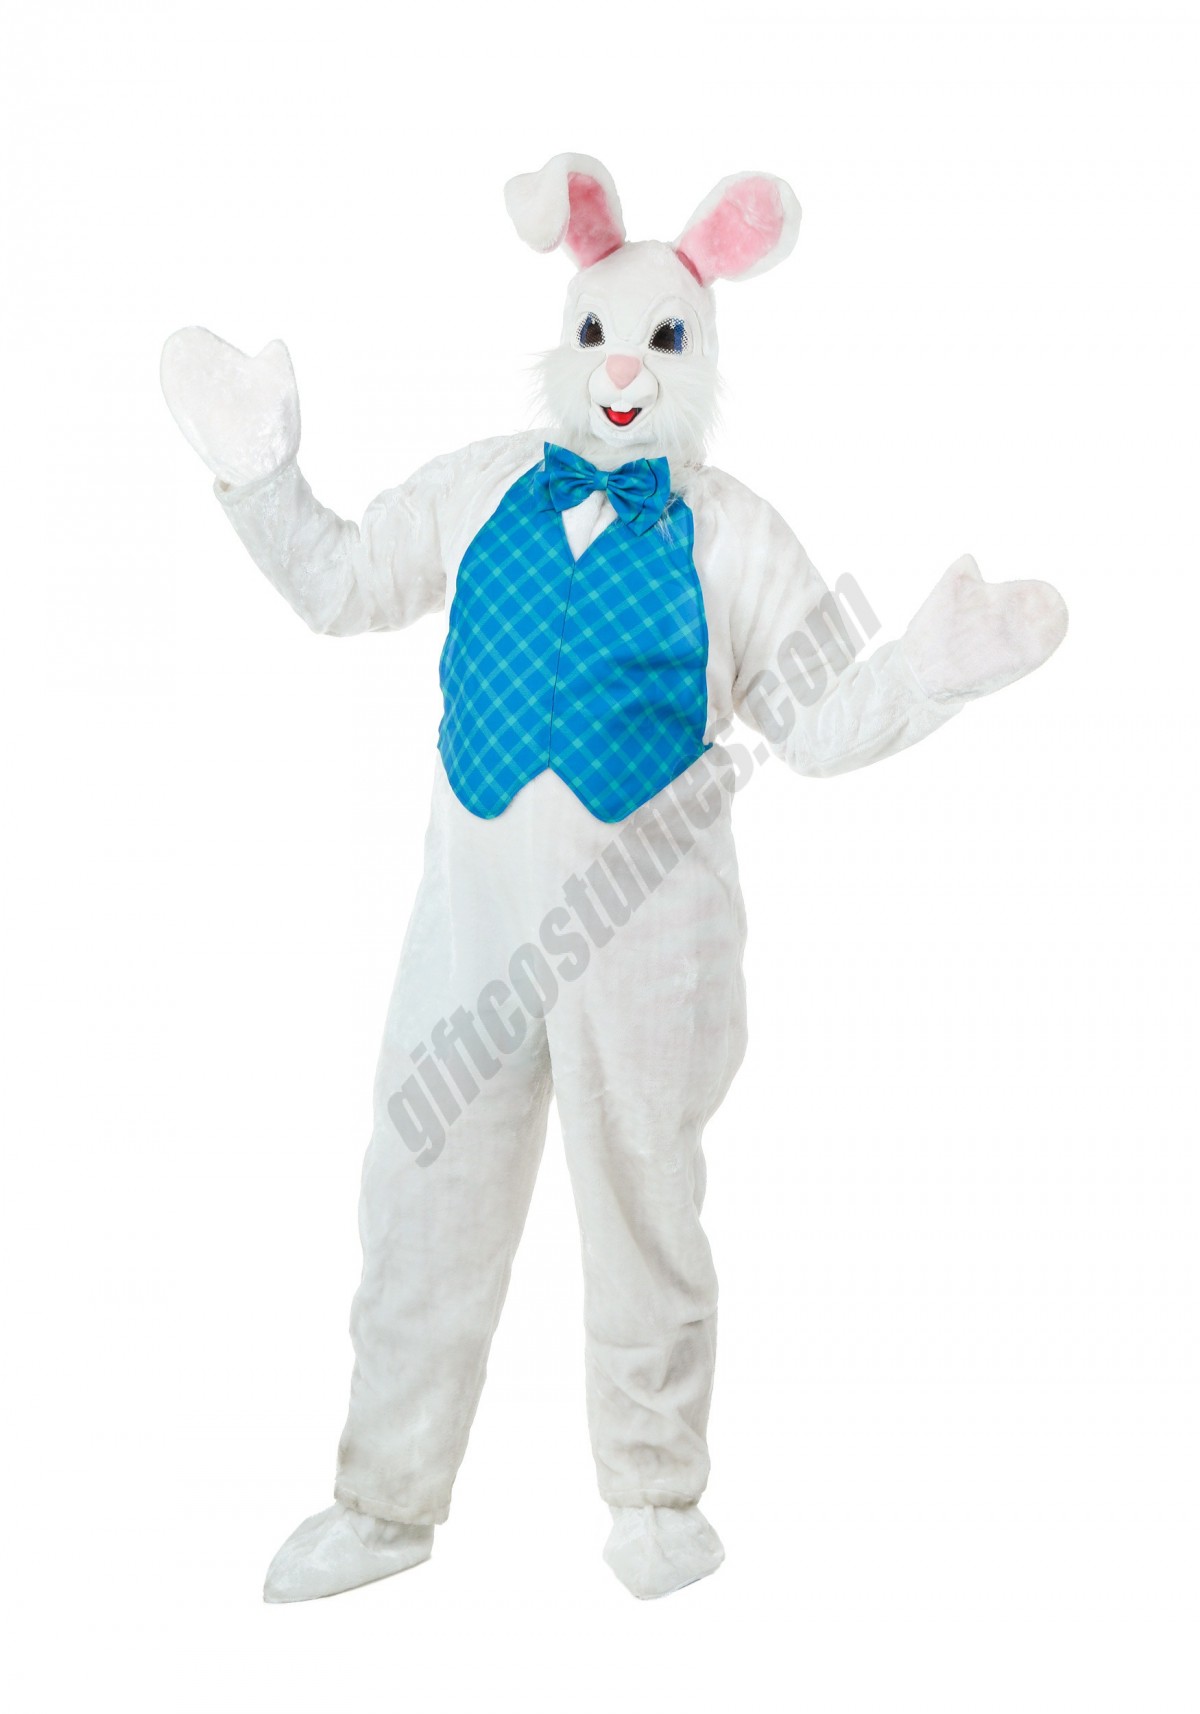 Plus Size Mascot Easter Bunny Costume Promotions - -0